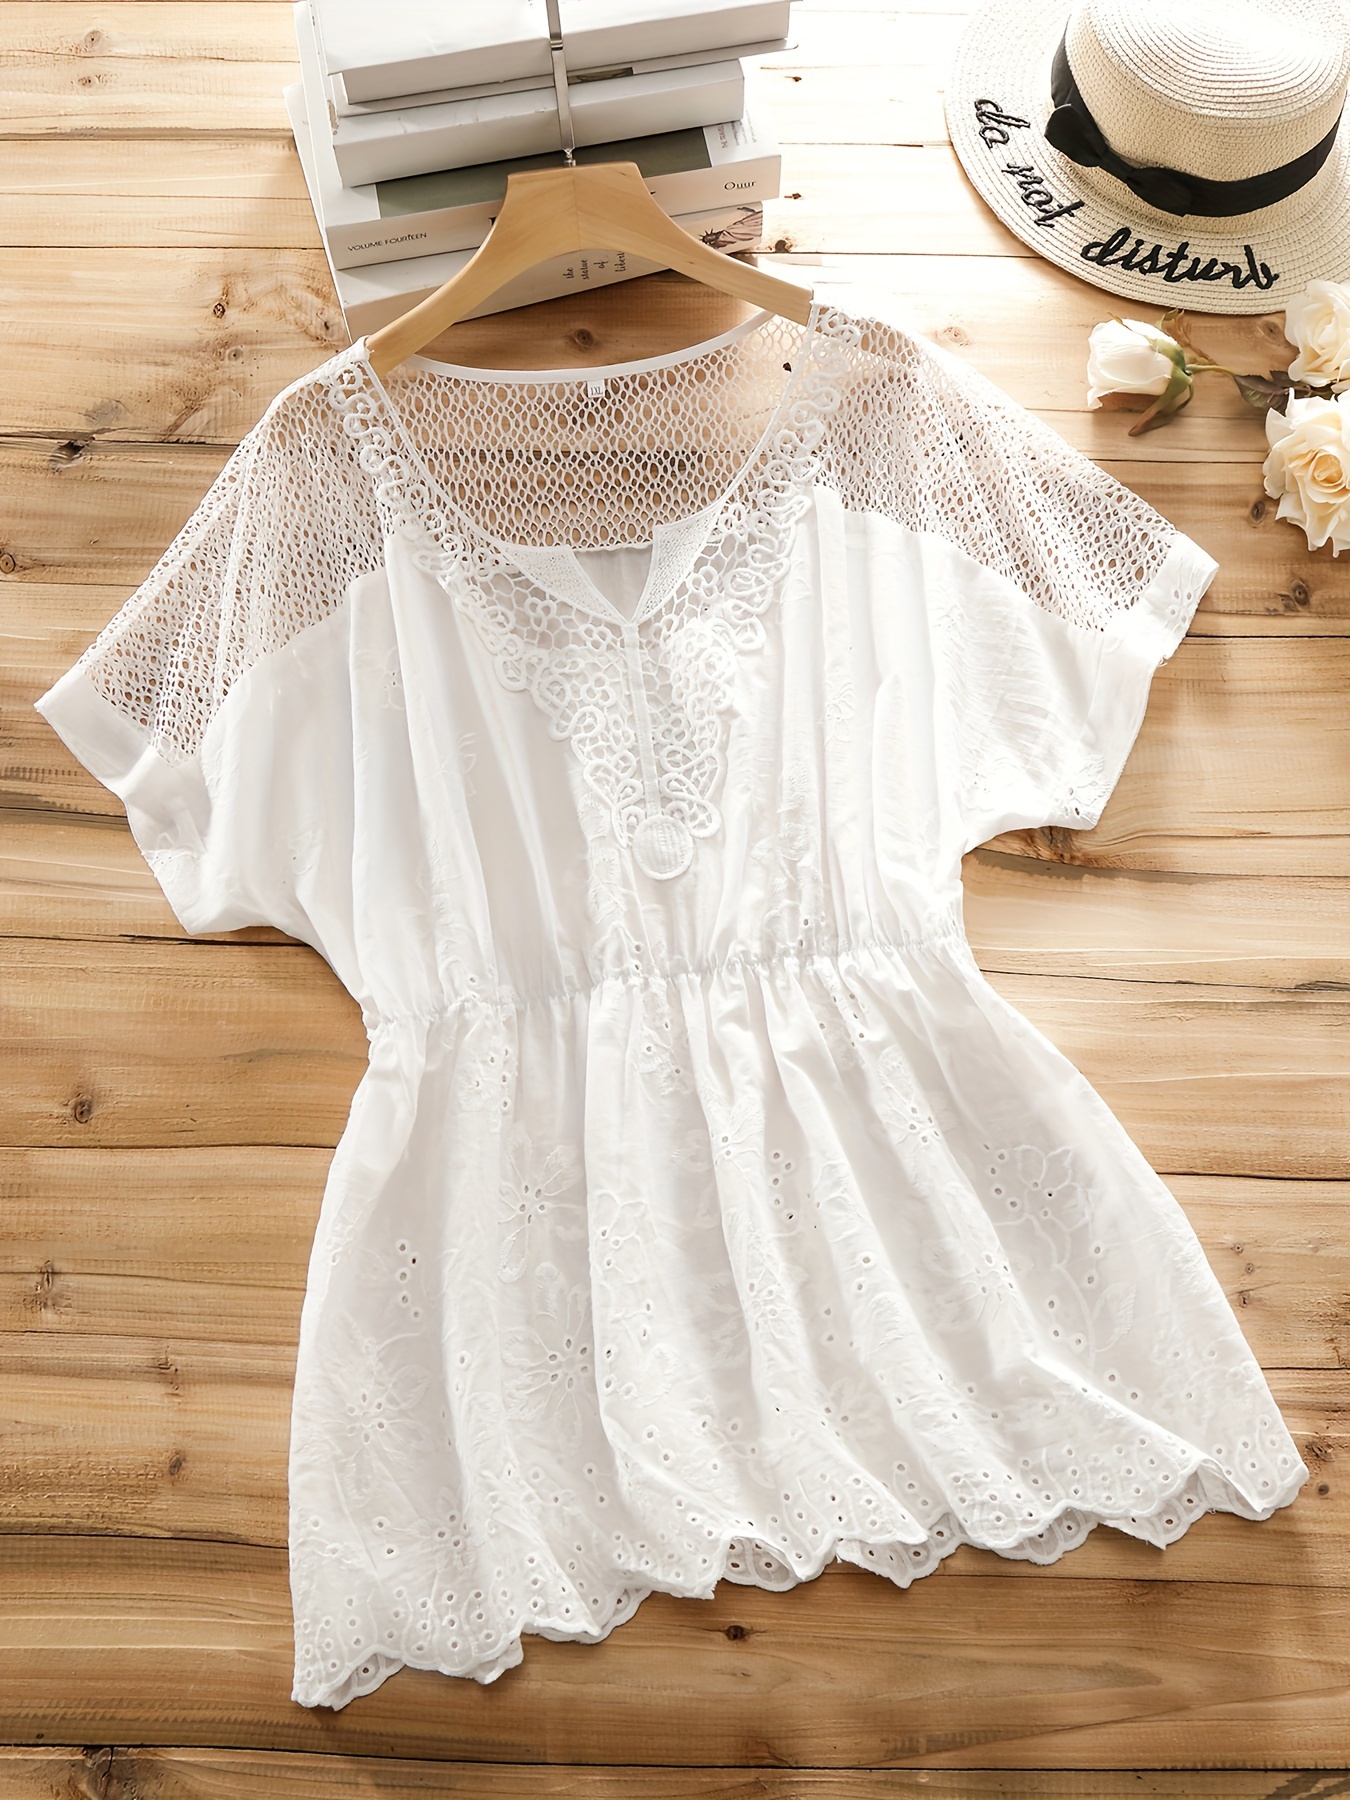 Plus Size Tops for Women Dressy Casual Lace Stitching Short Sleeve